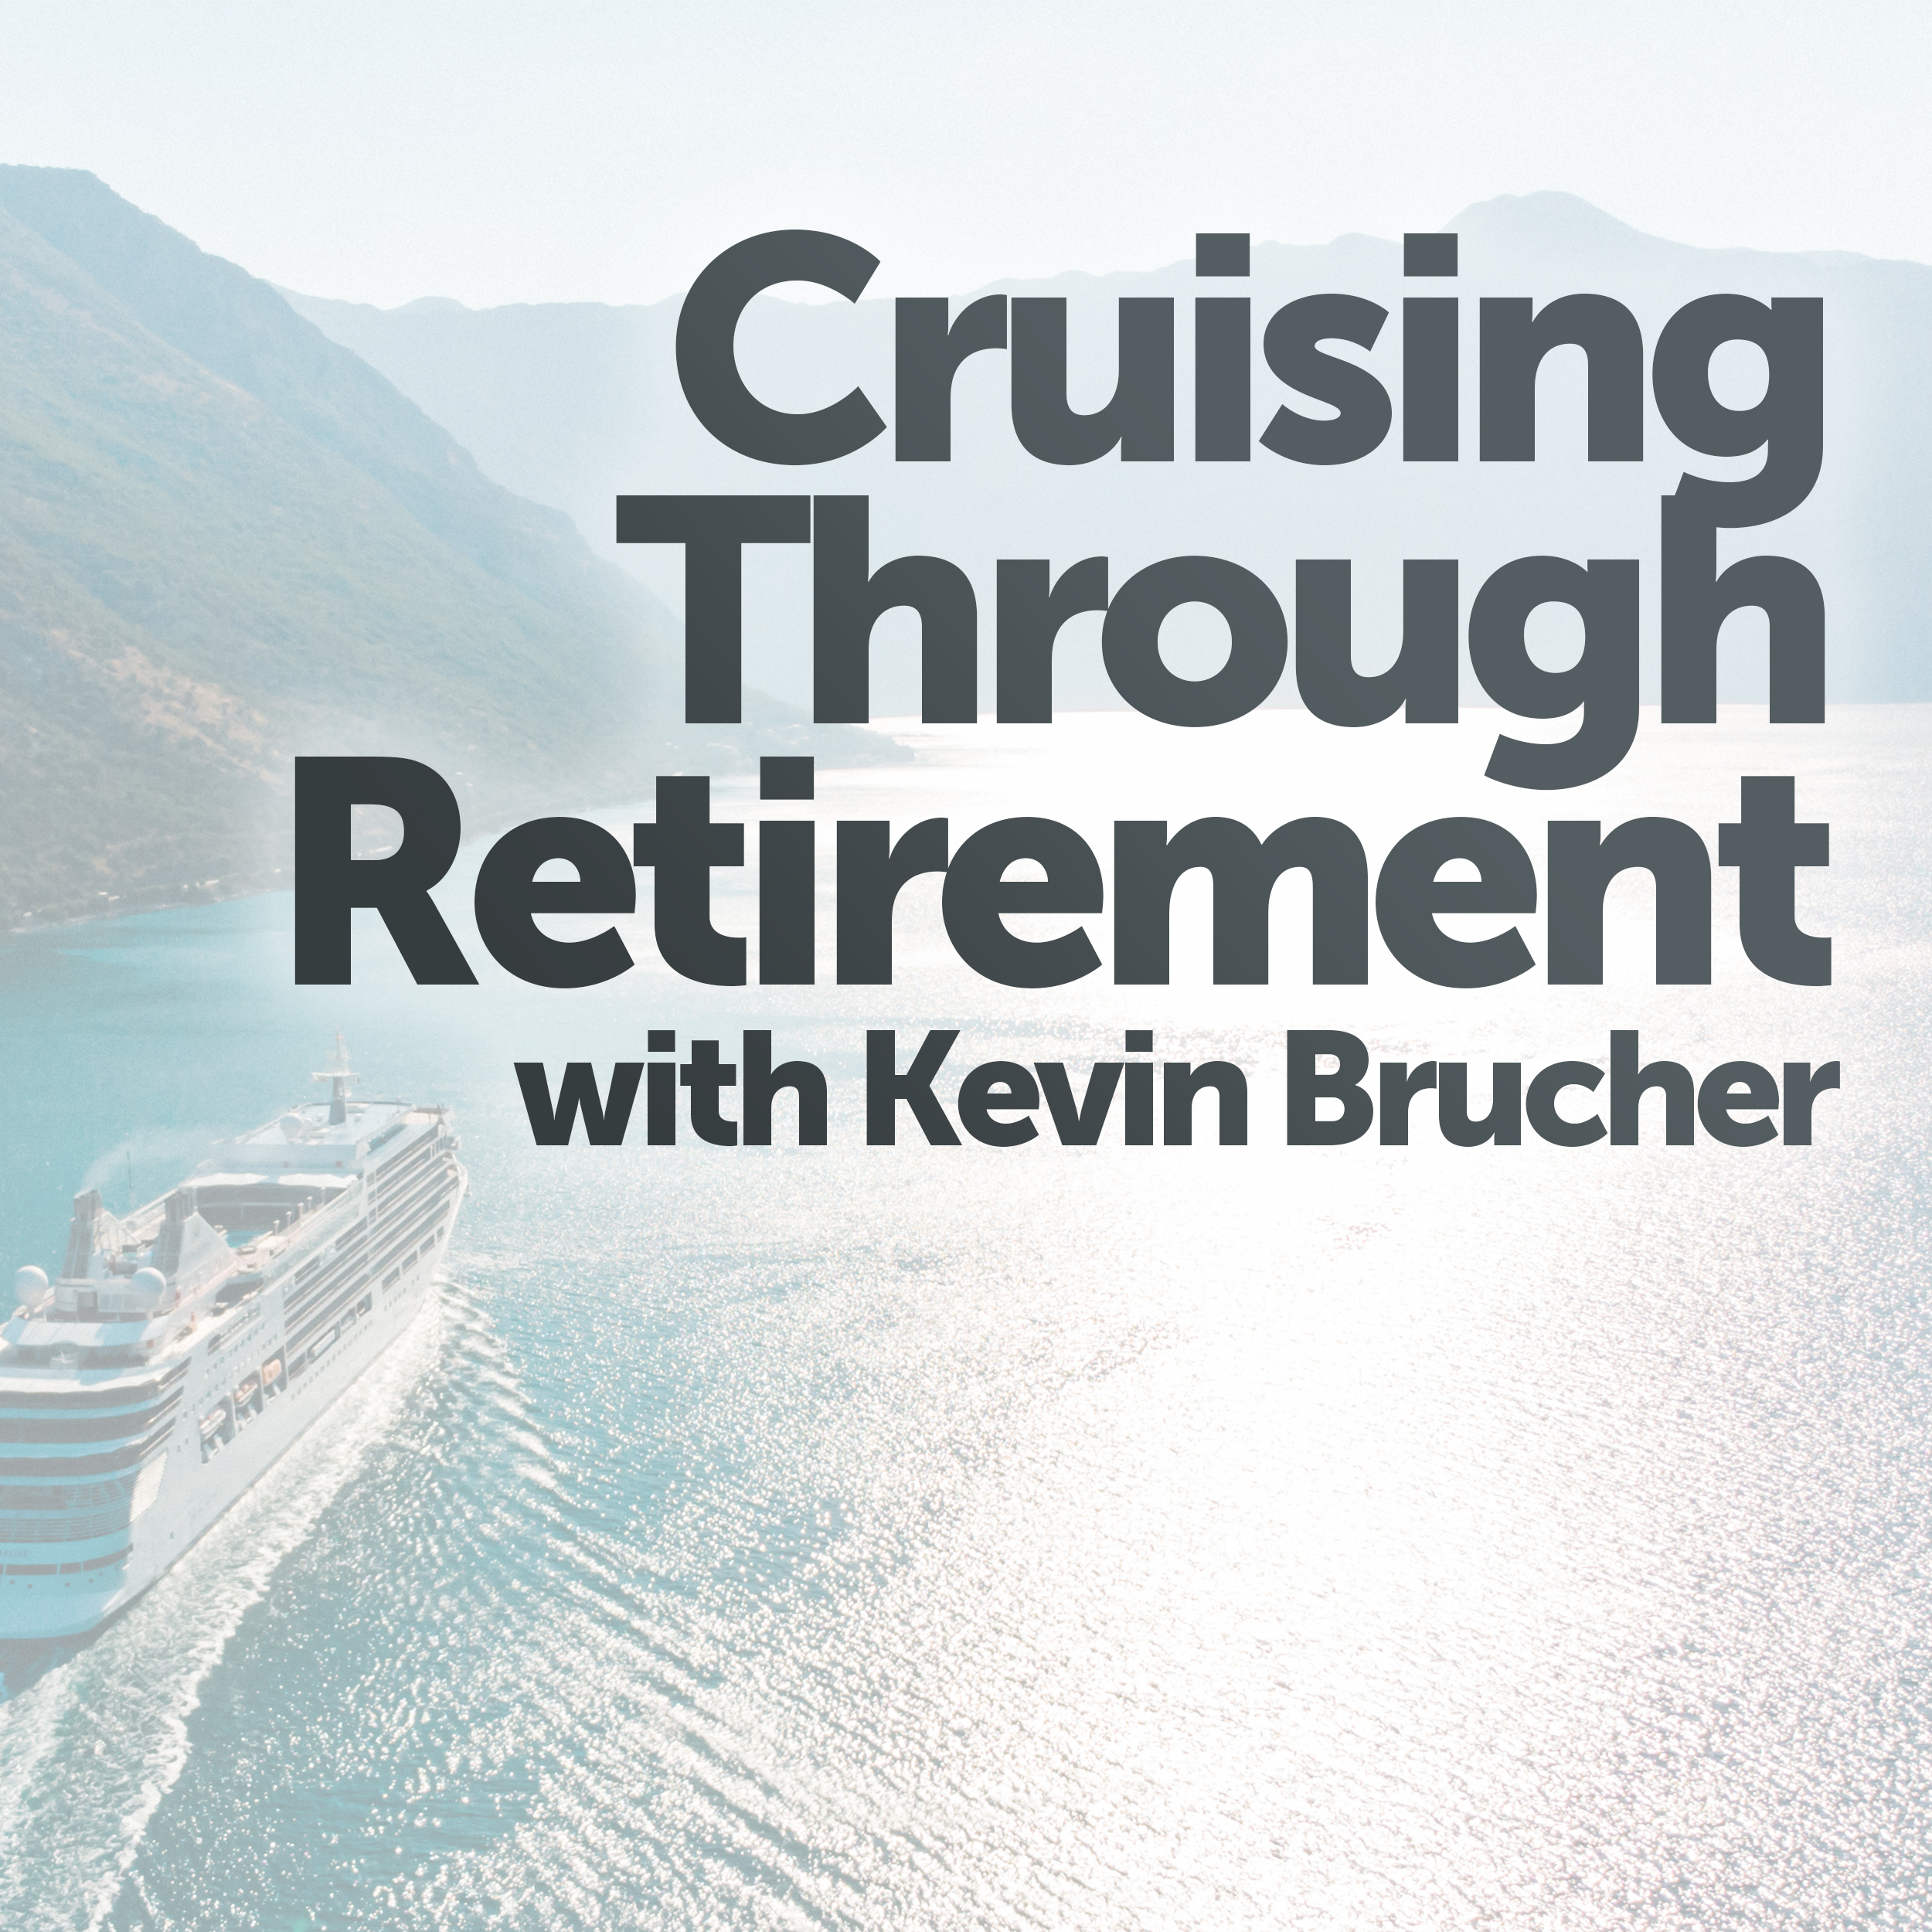 Cruising Through Retirement The volatile market and rising interest rates could impact your safe withdrawal rate of your retirement savings. Kevin Brucher breaks it down this week.